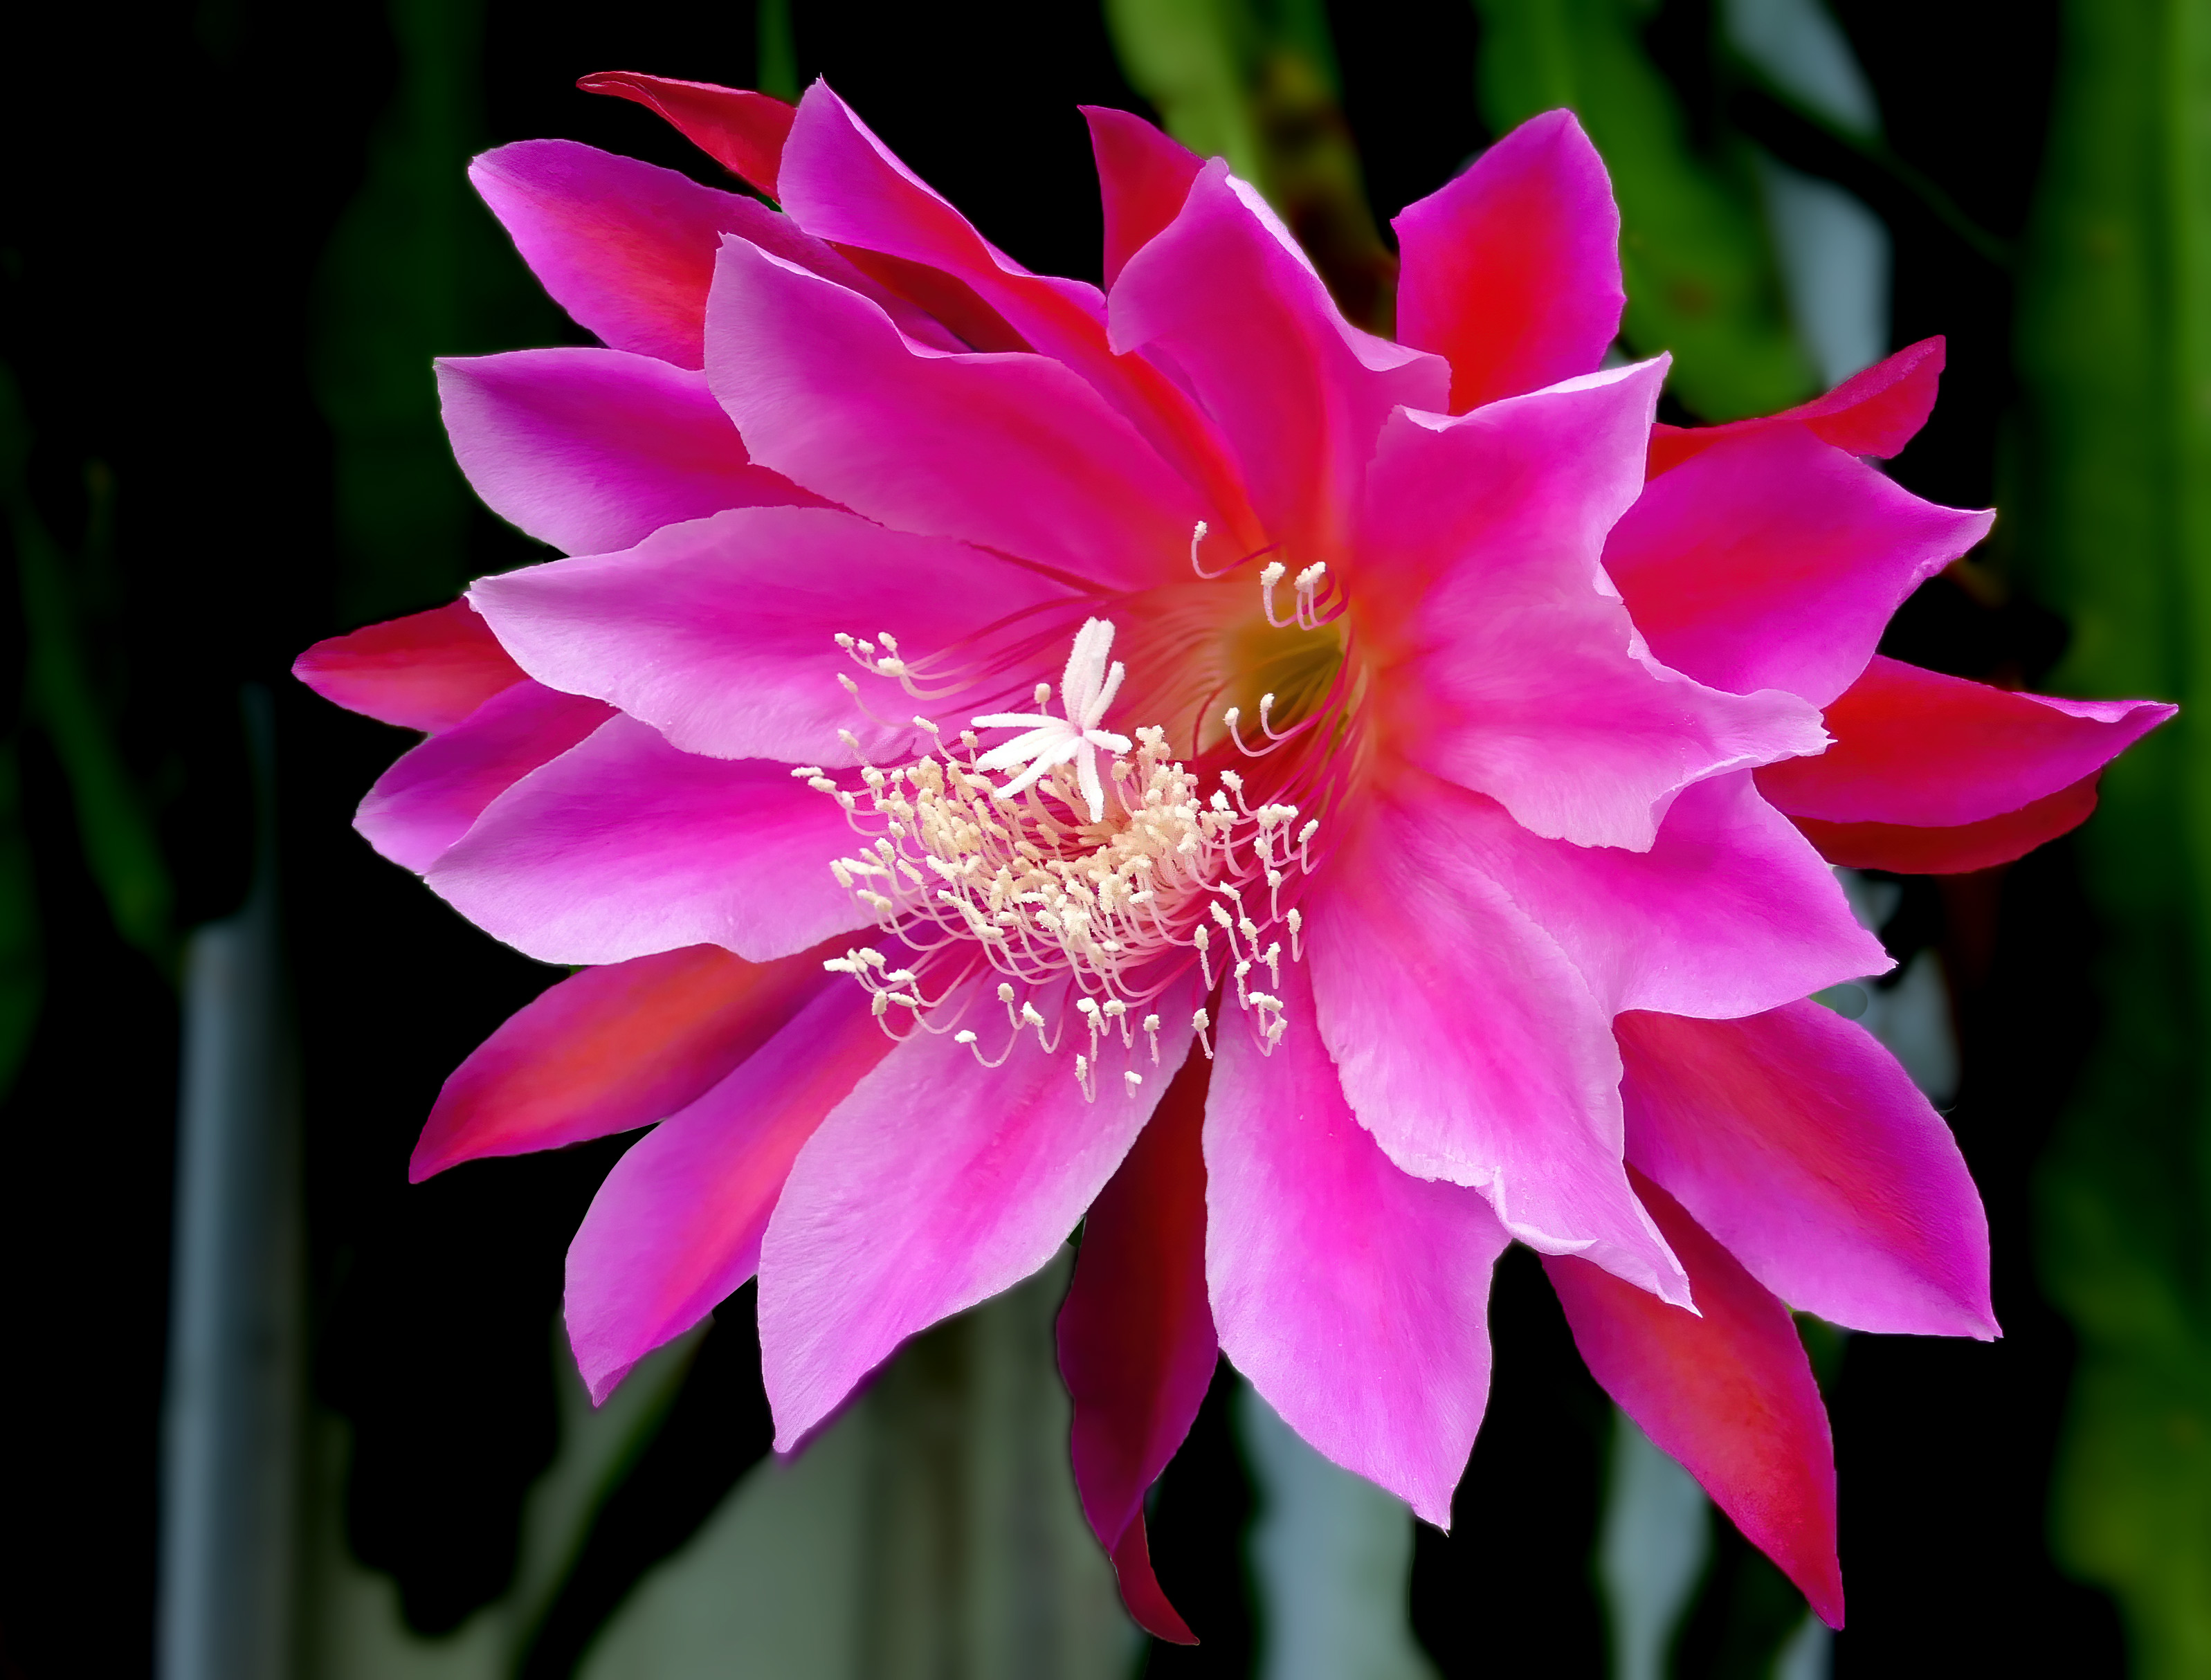 Orchid cactus - Wikipedia